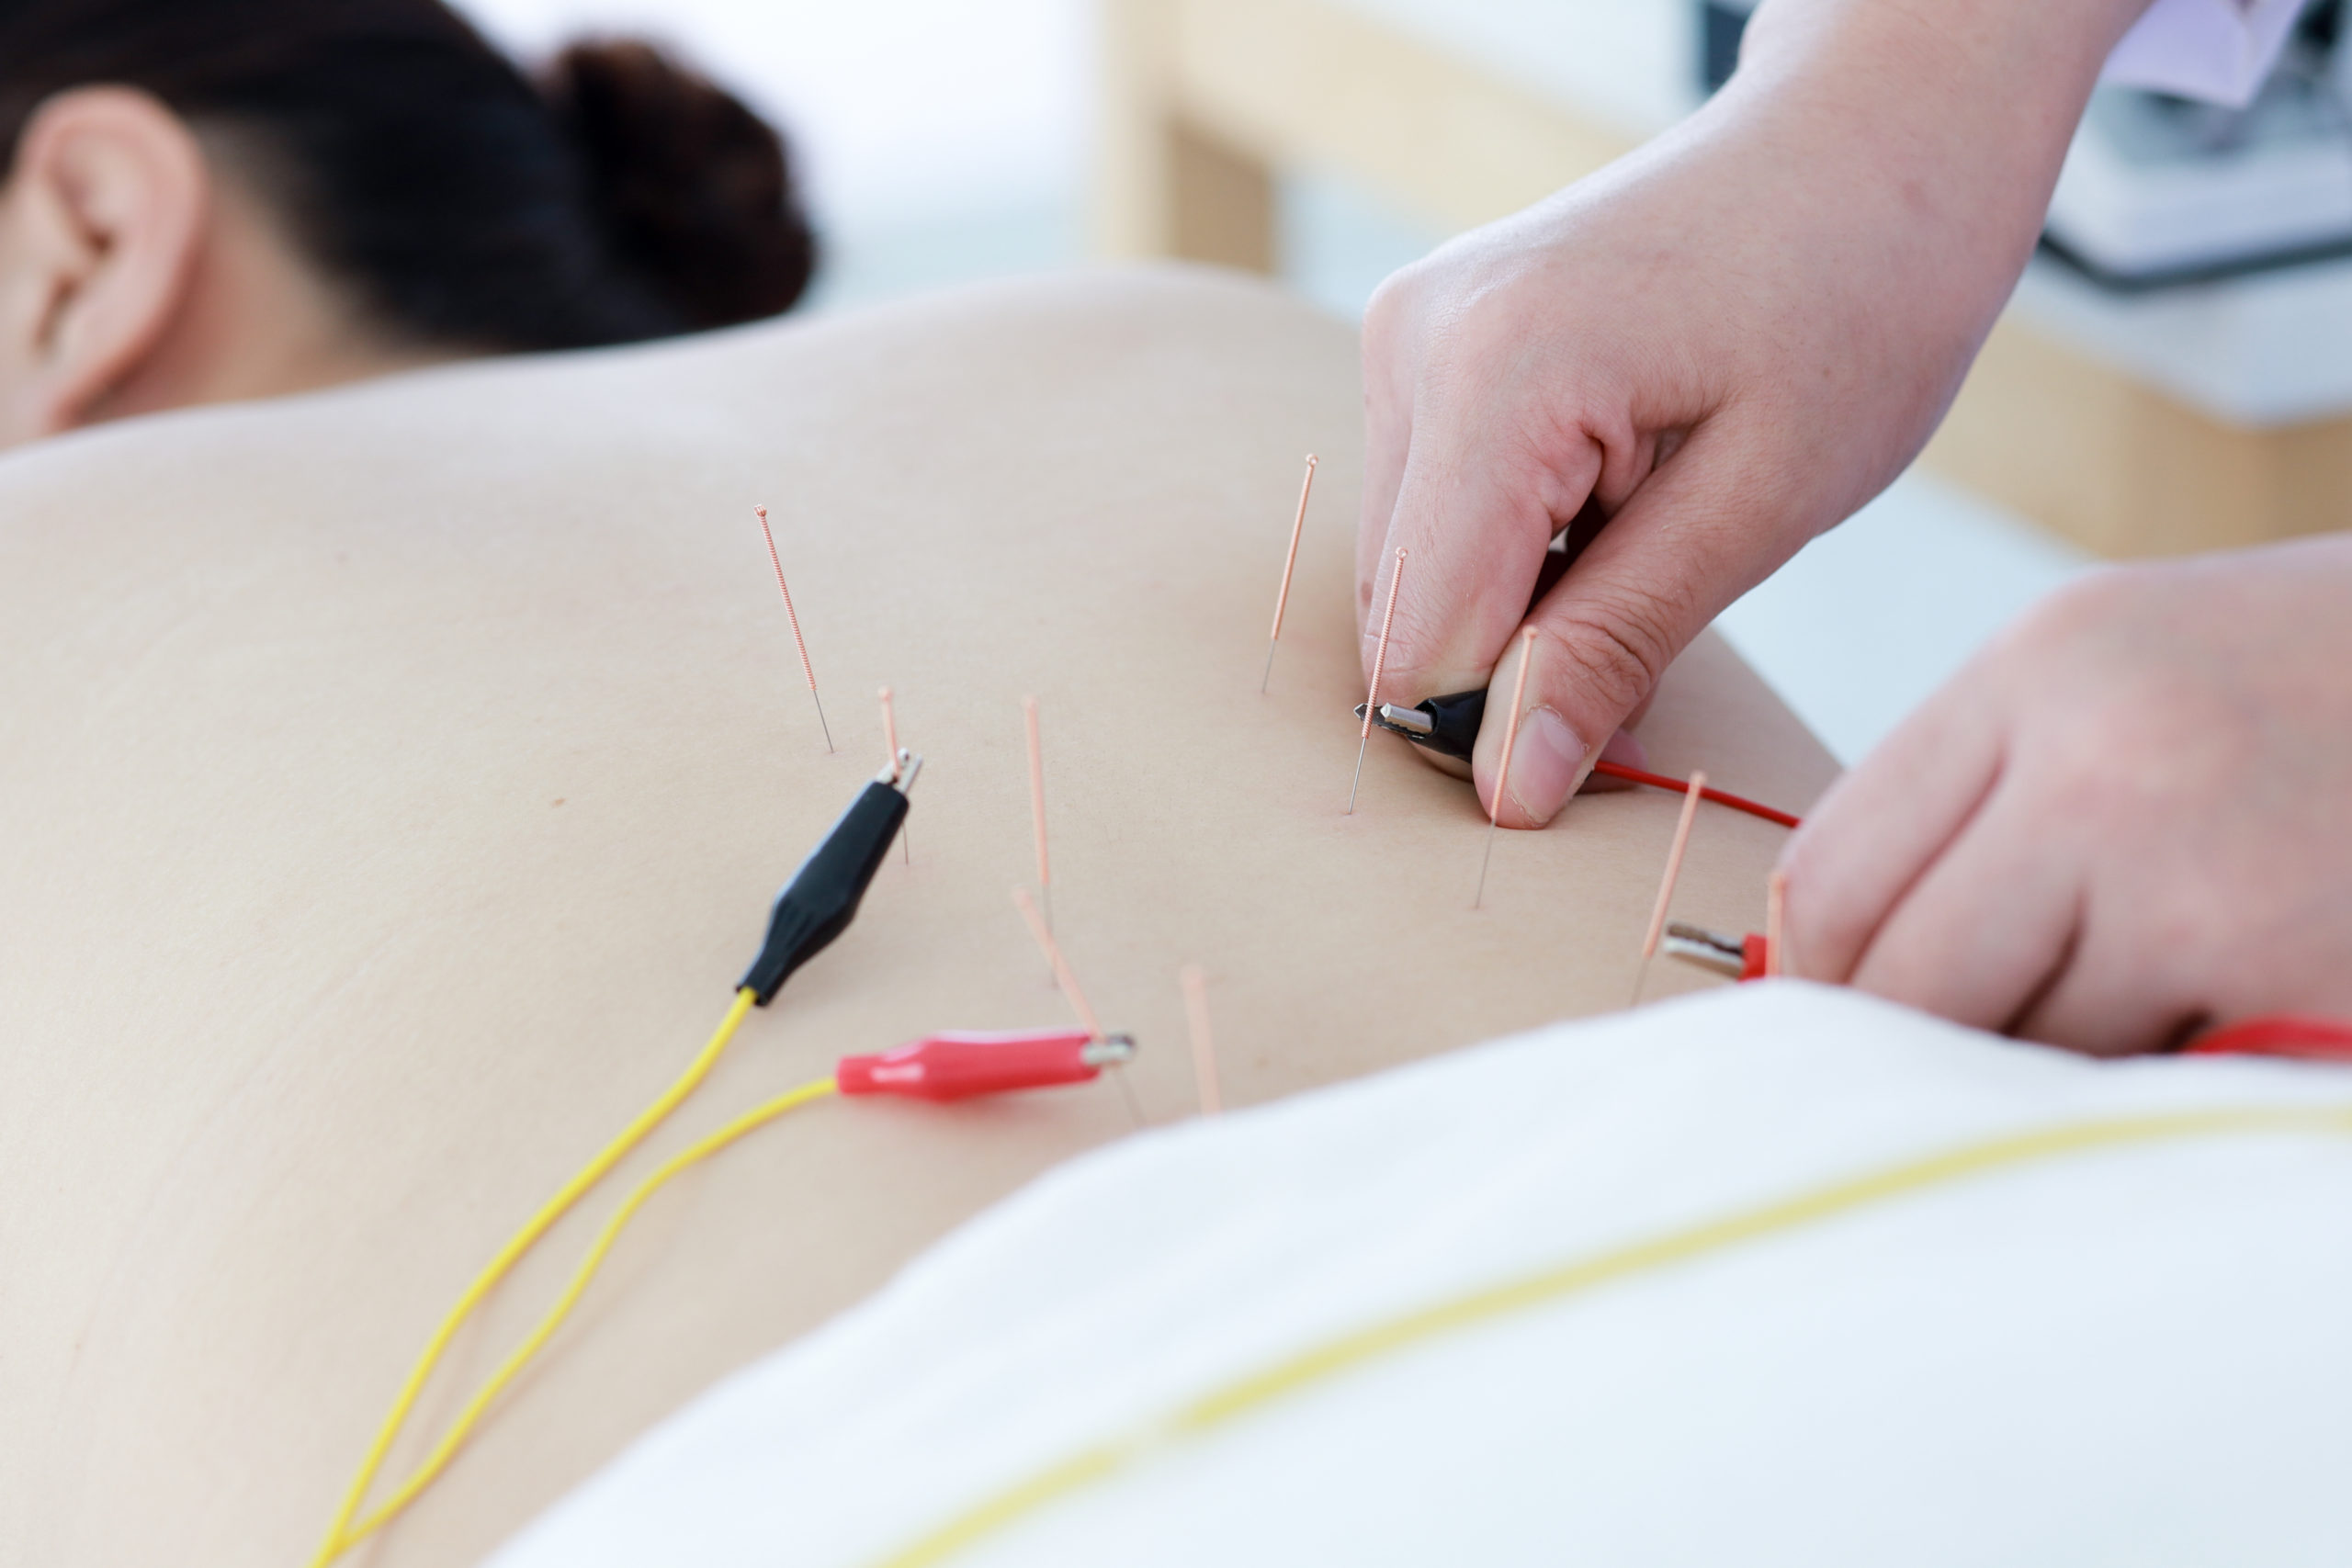 Why study Neuropuncture, neuroscience electroacupuncture